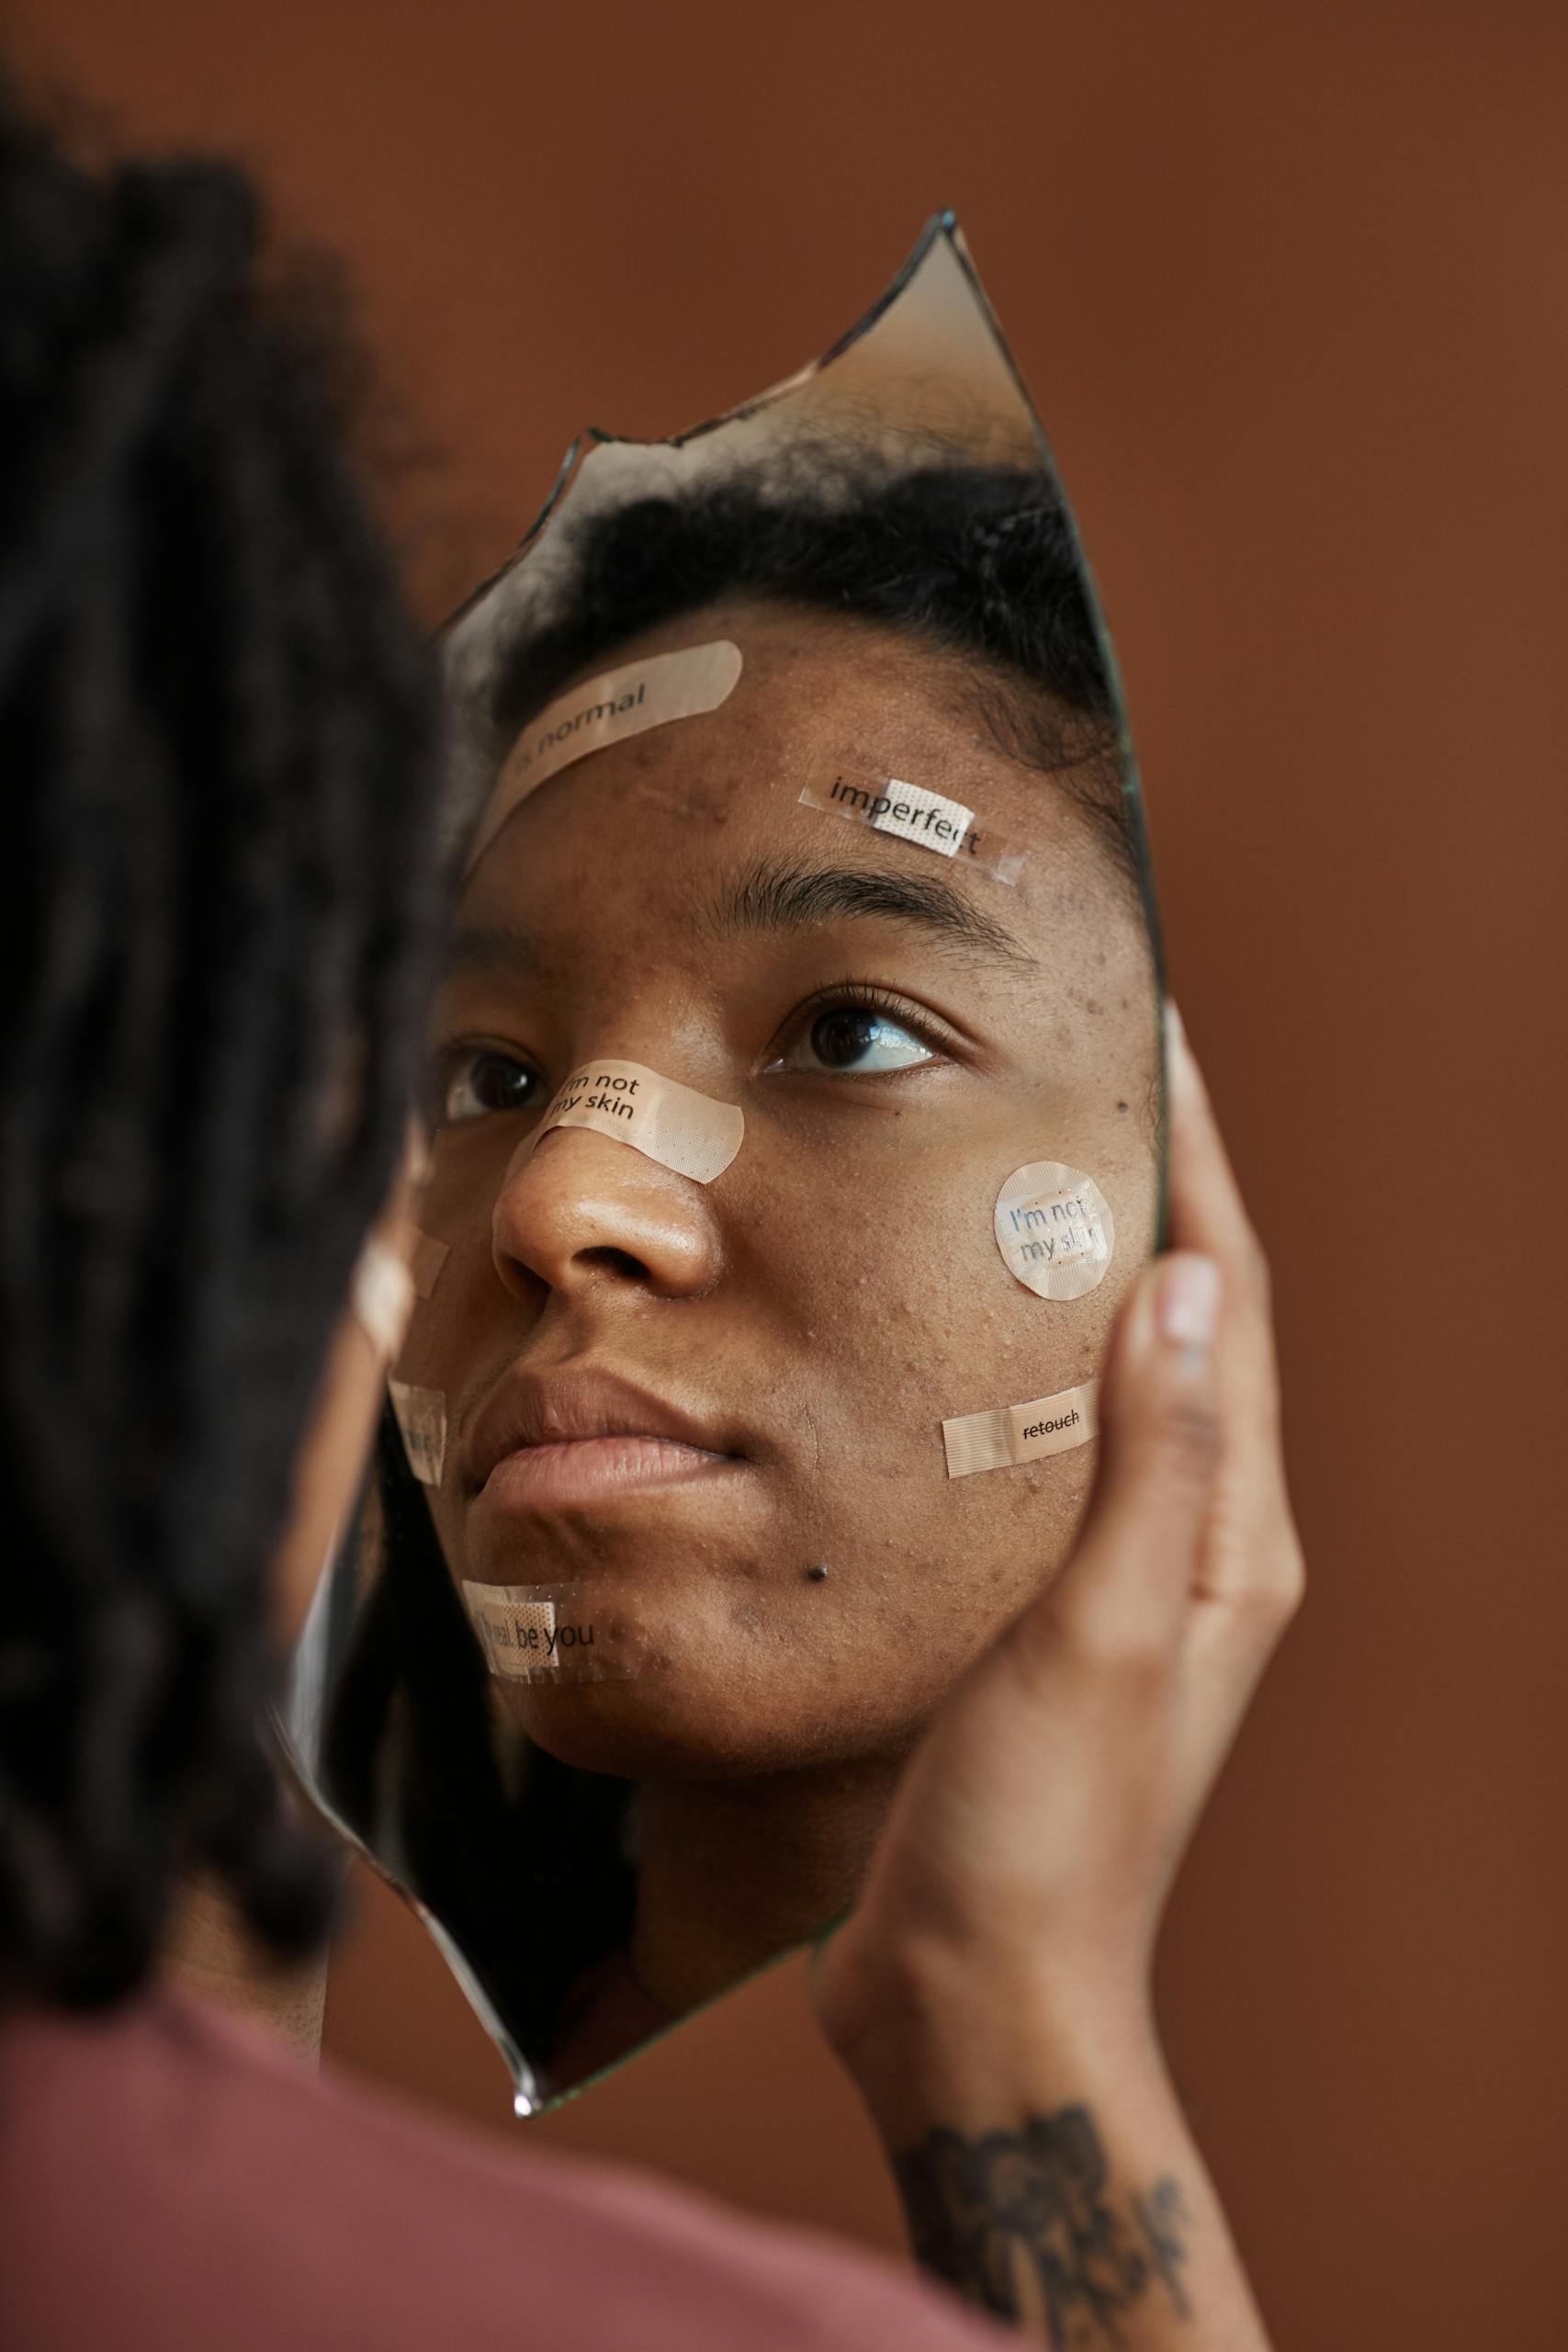 A Woman with Band Aids on Face Looking in a Broken Mirror